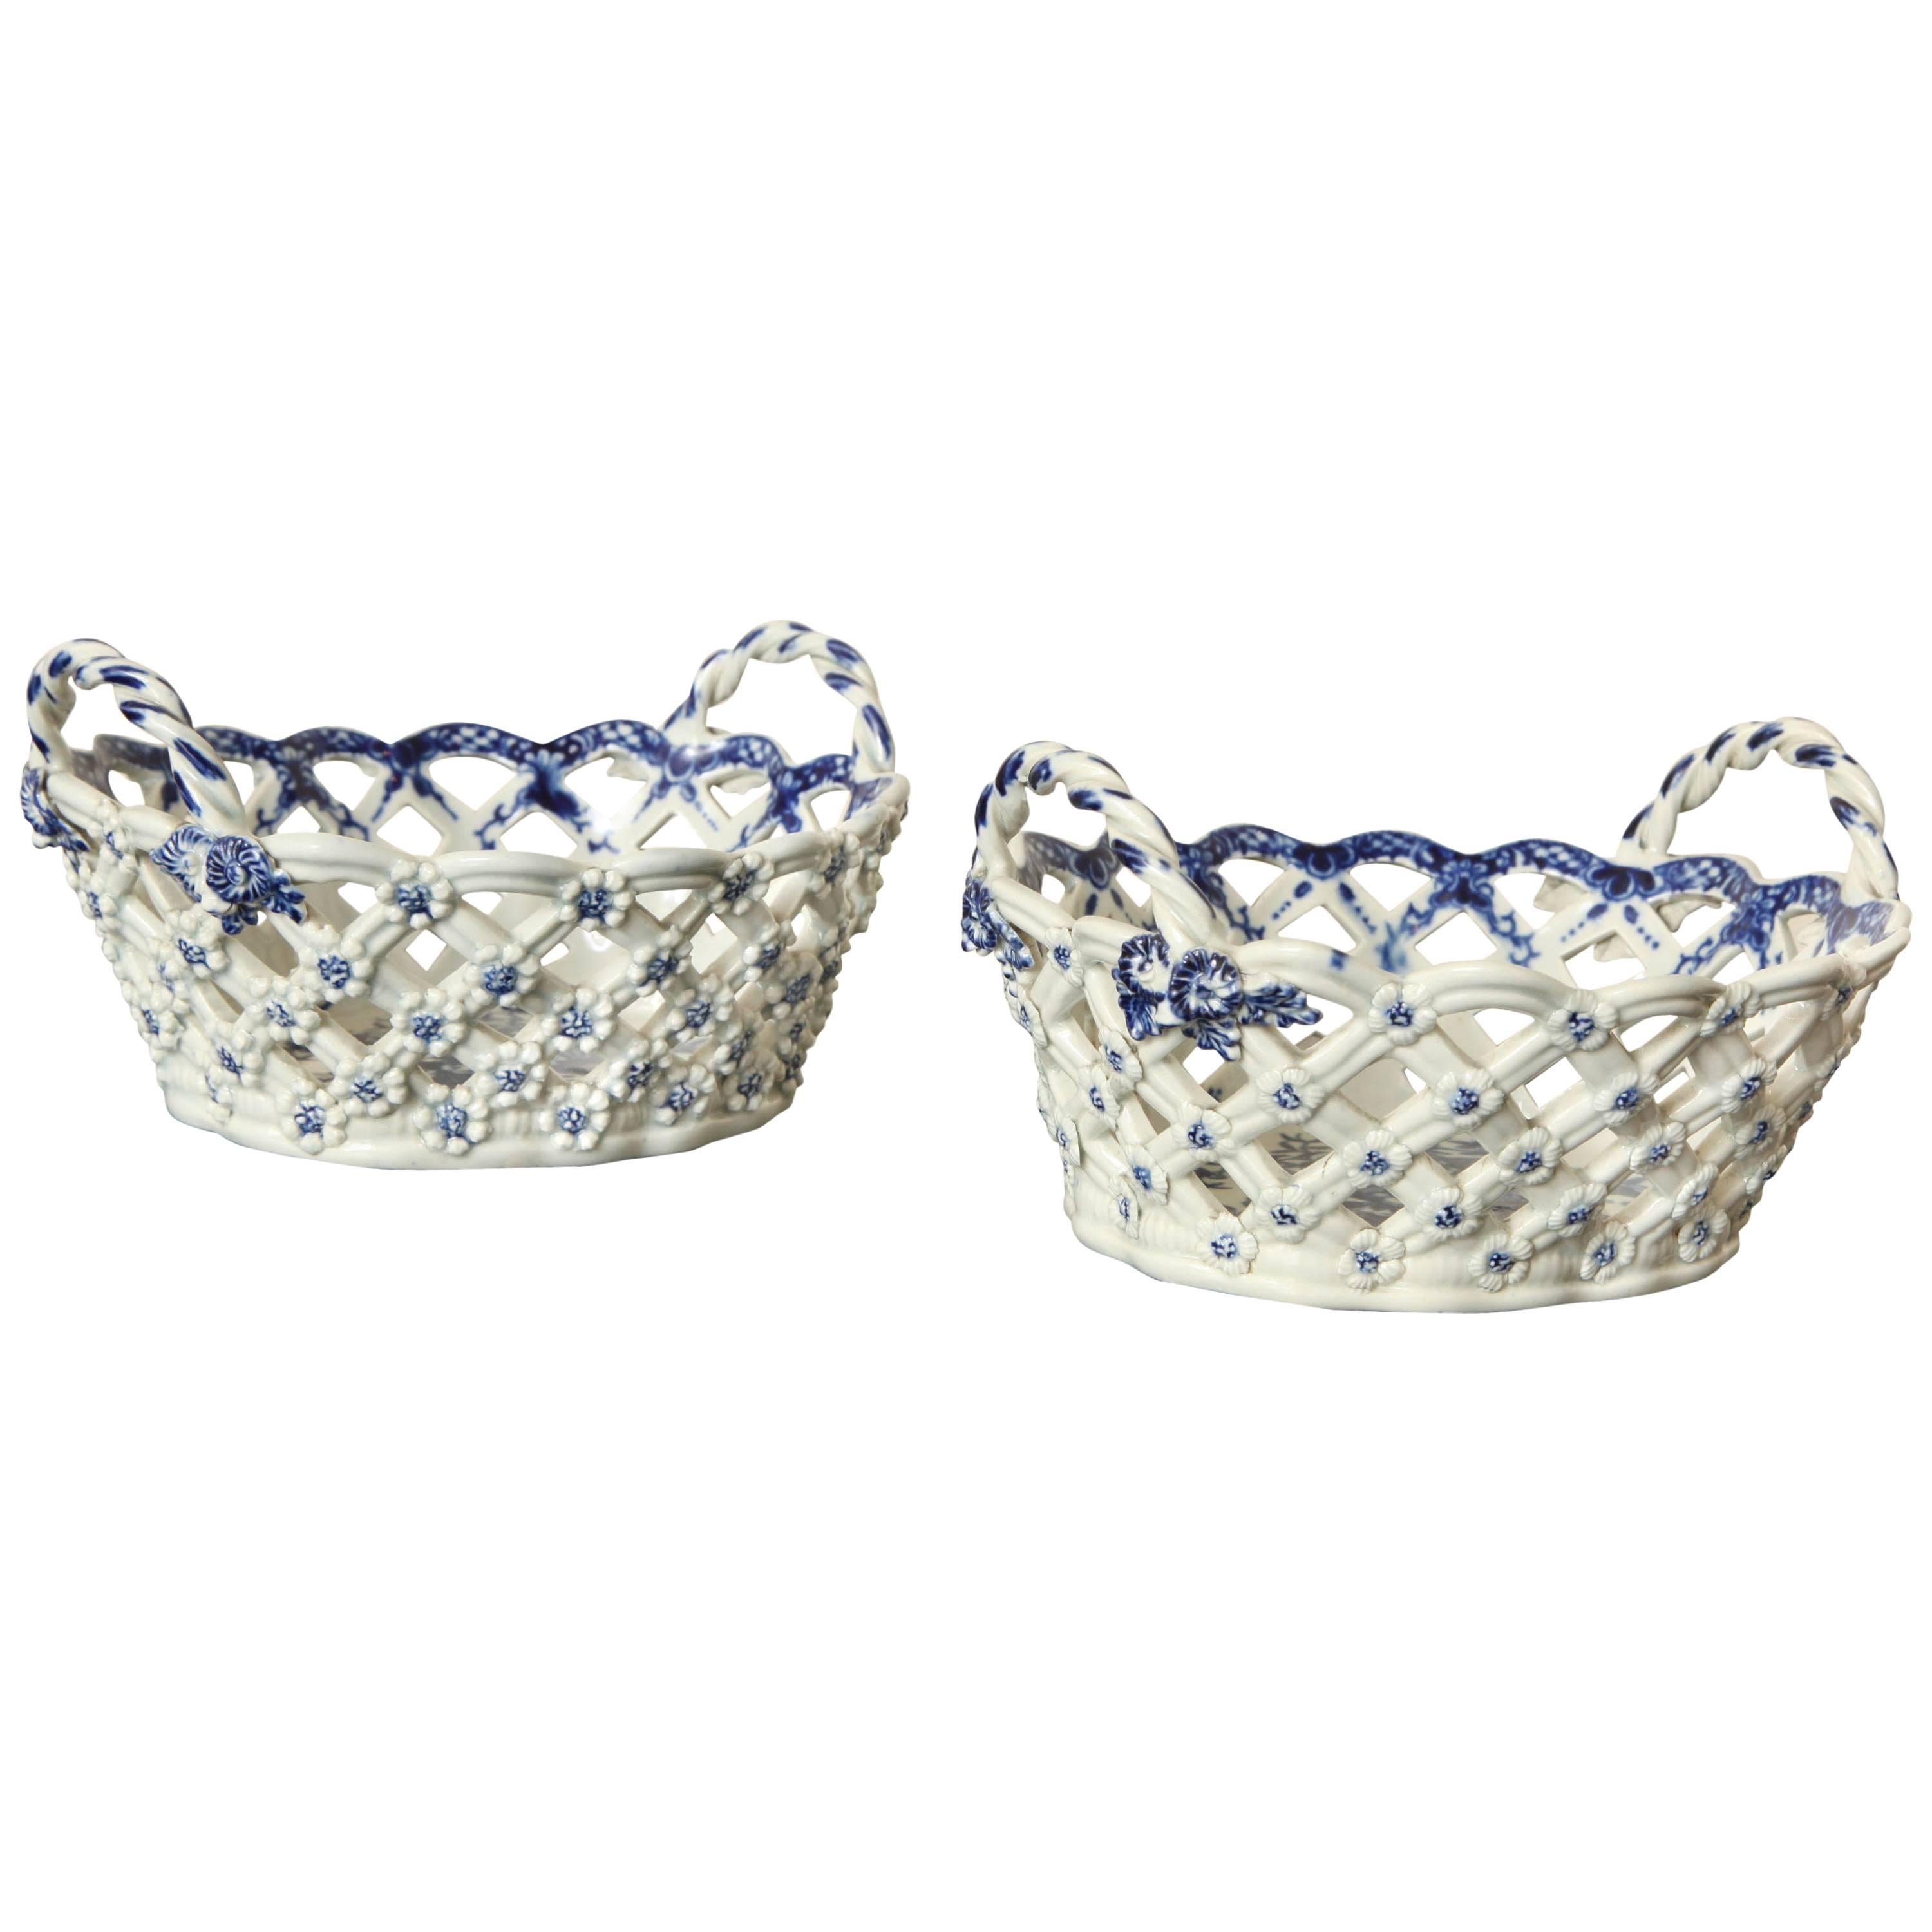 Pair of First Period Dr. Wall Worcester "Pine Cone" Baskets